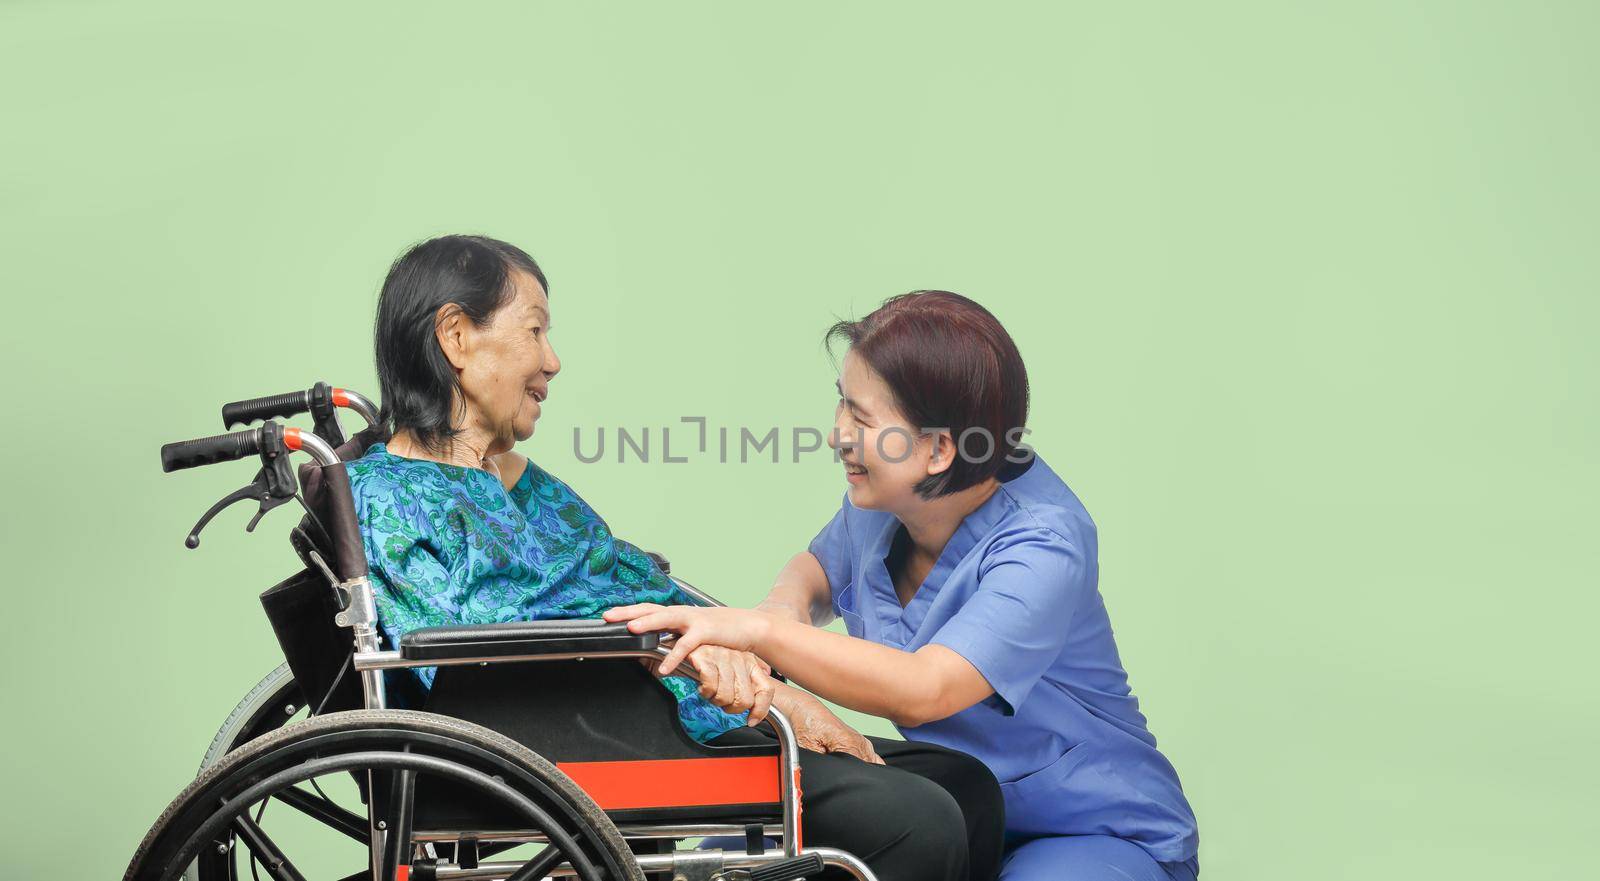 elderly woman happiness talking with caregiver